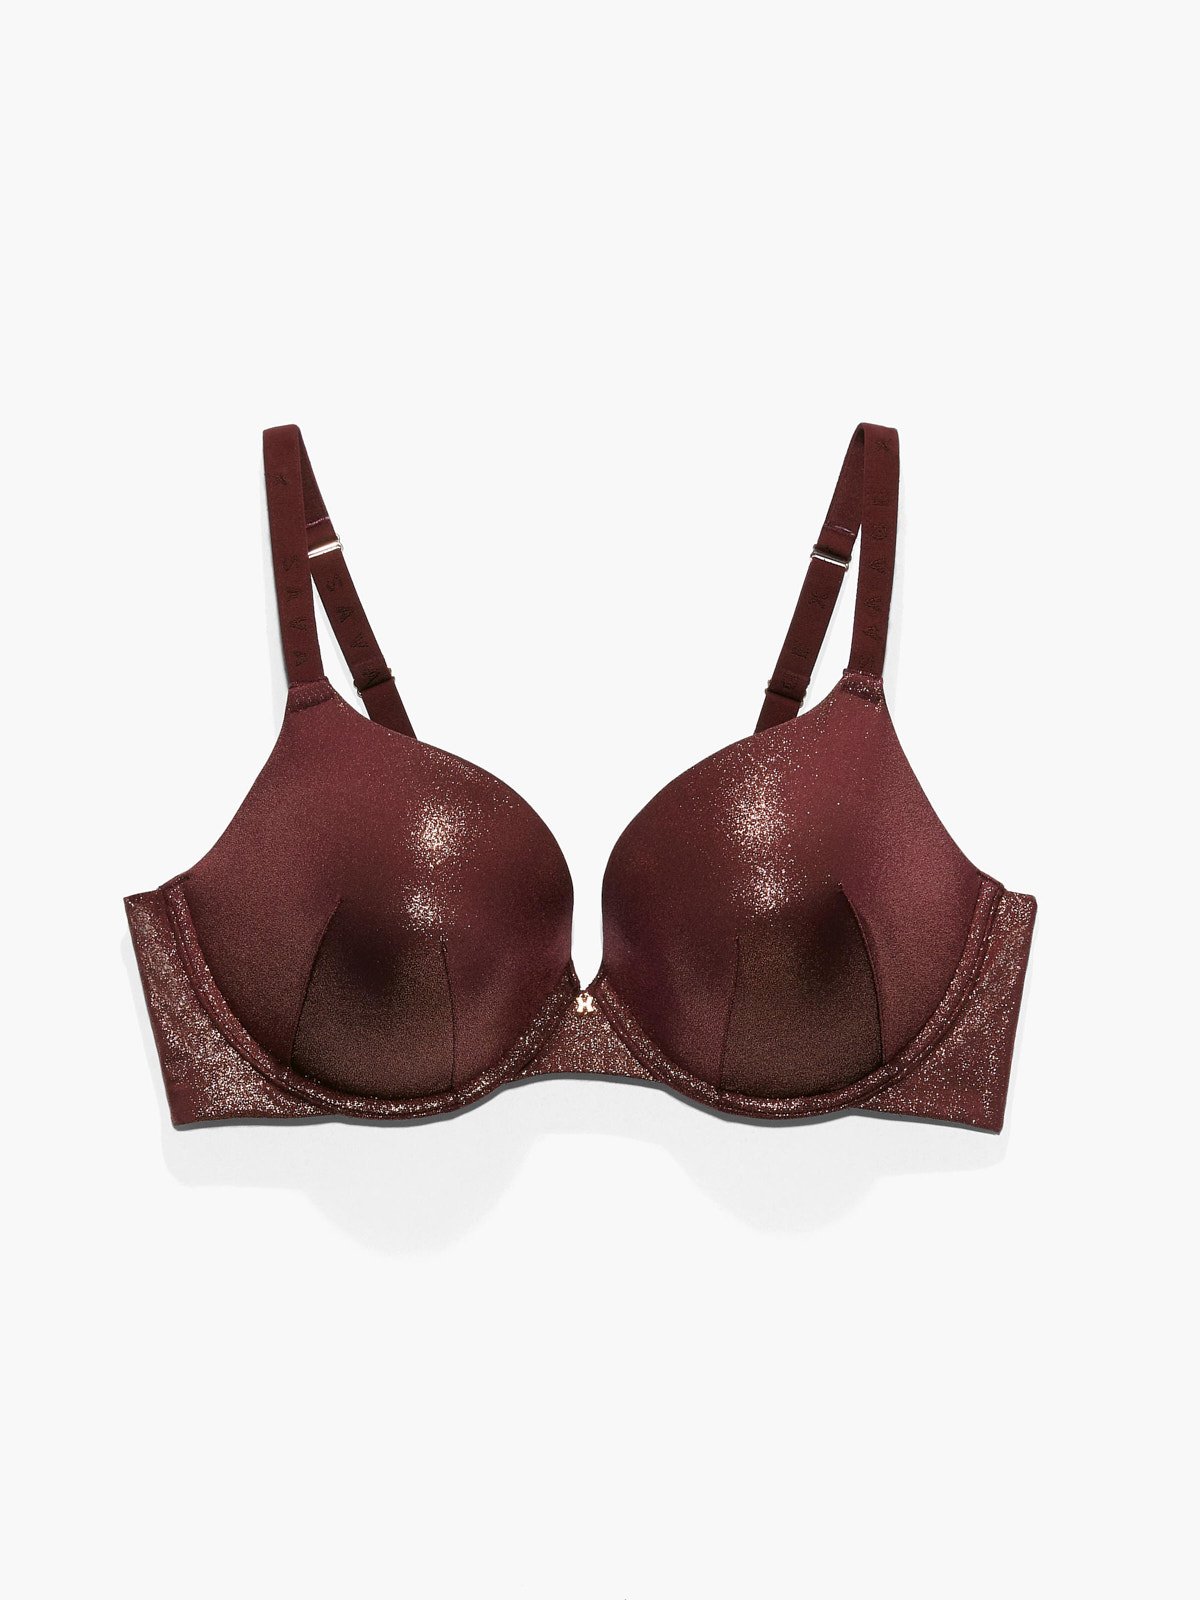 Women's quality push-up bras by Corin made in Poland –